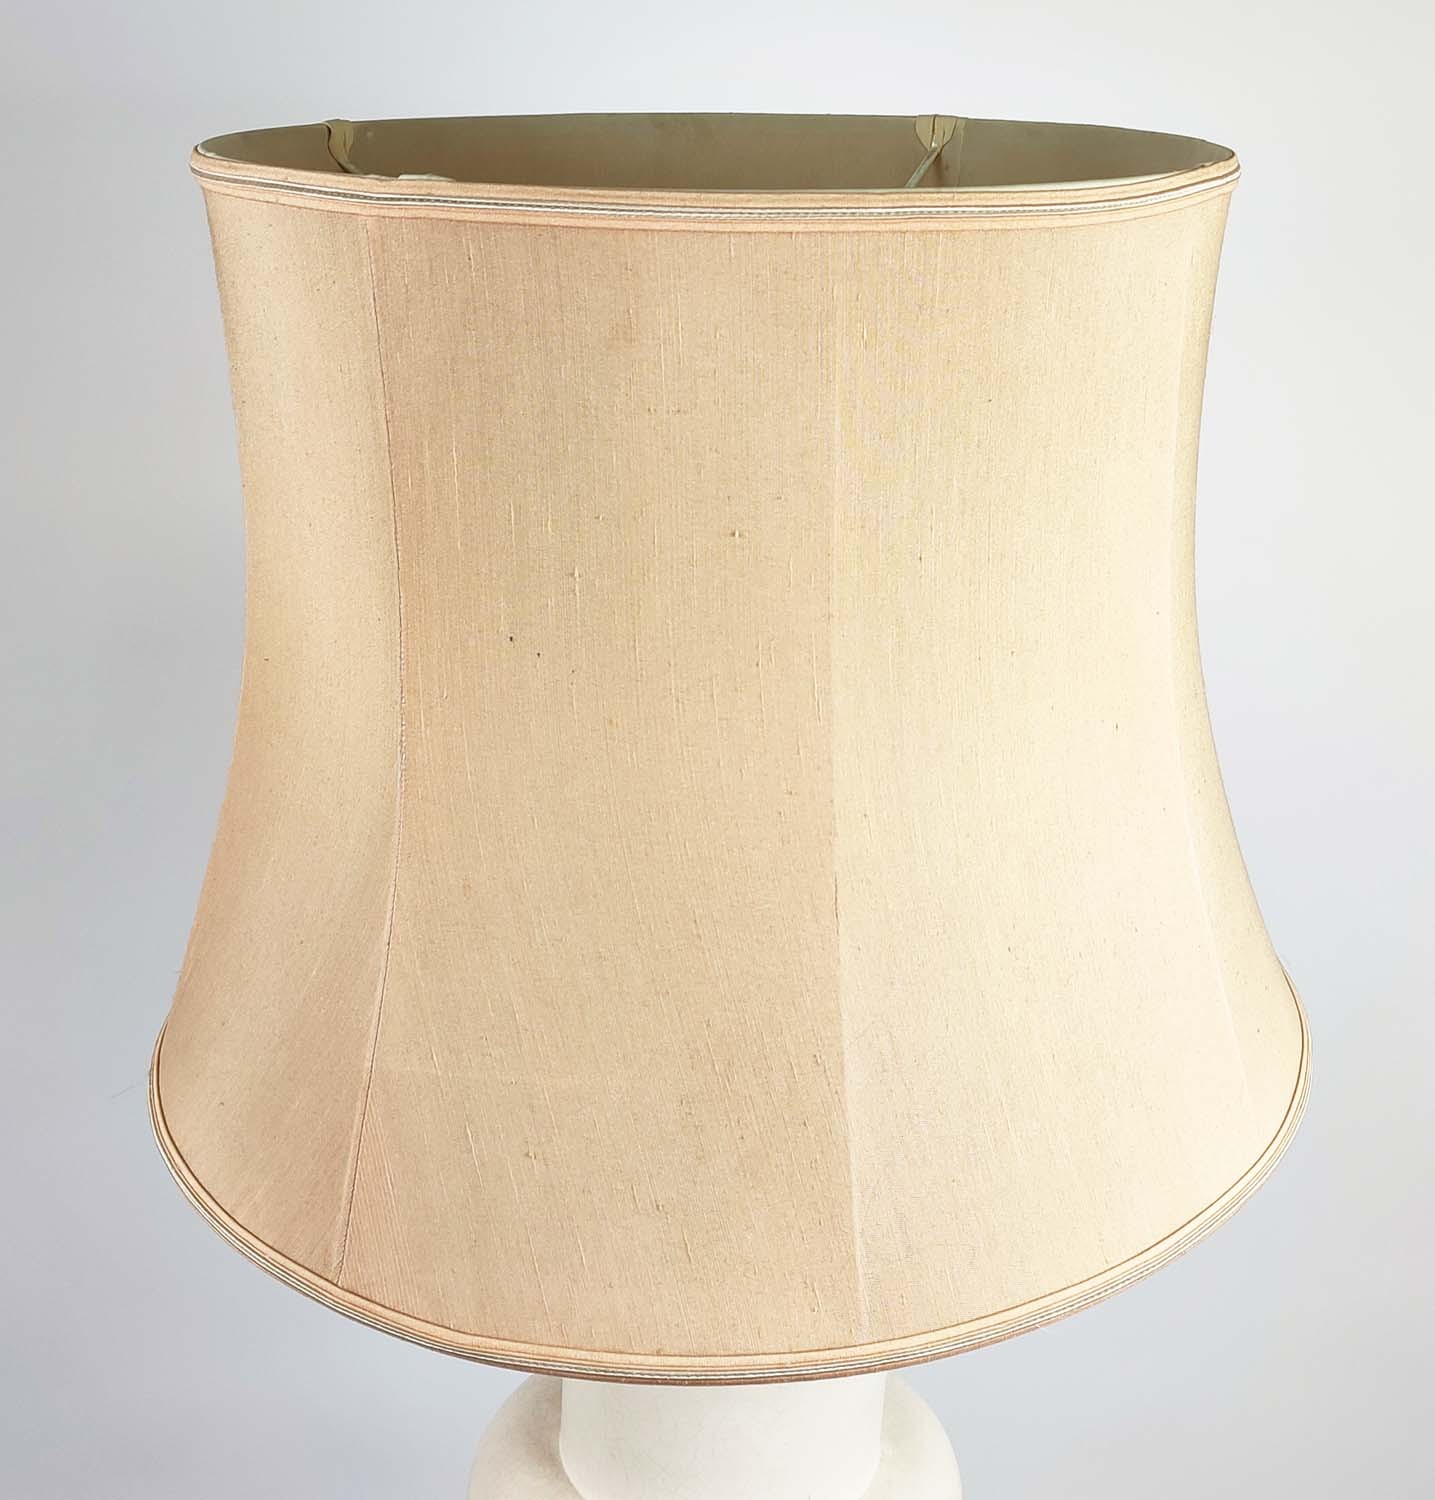 TABLE LAMP, white ceramic, with shade, 92cm high, 55cm diameter. - Image 2 of 6